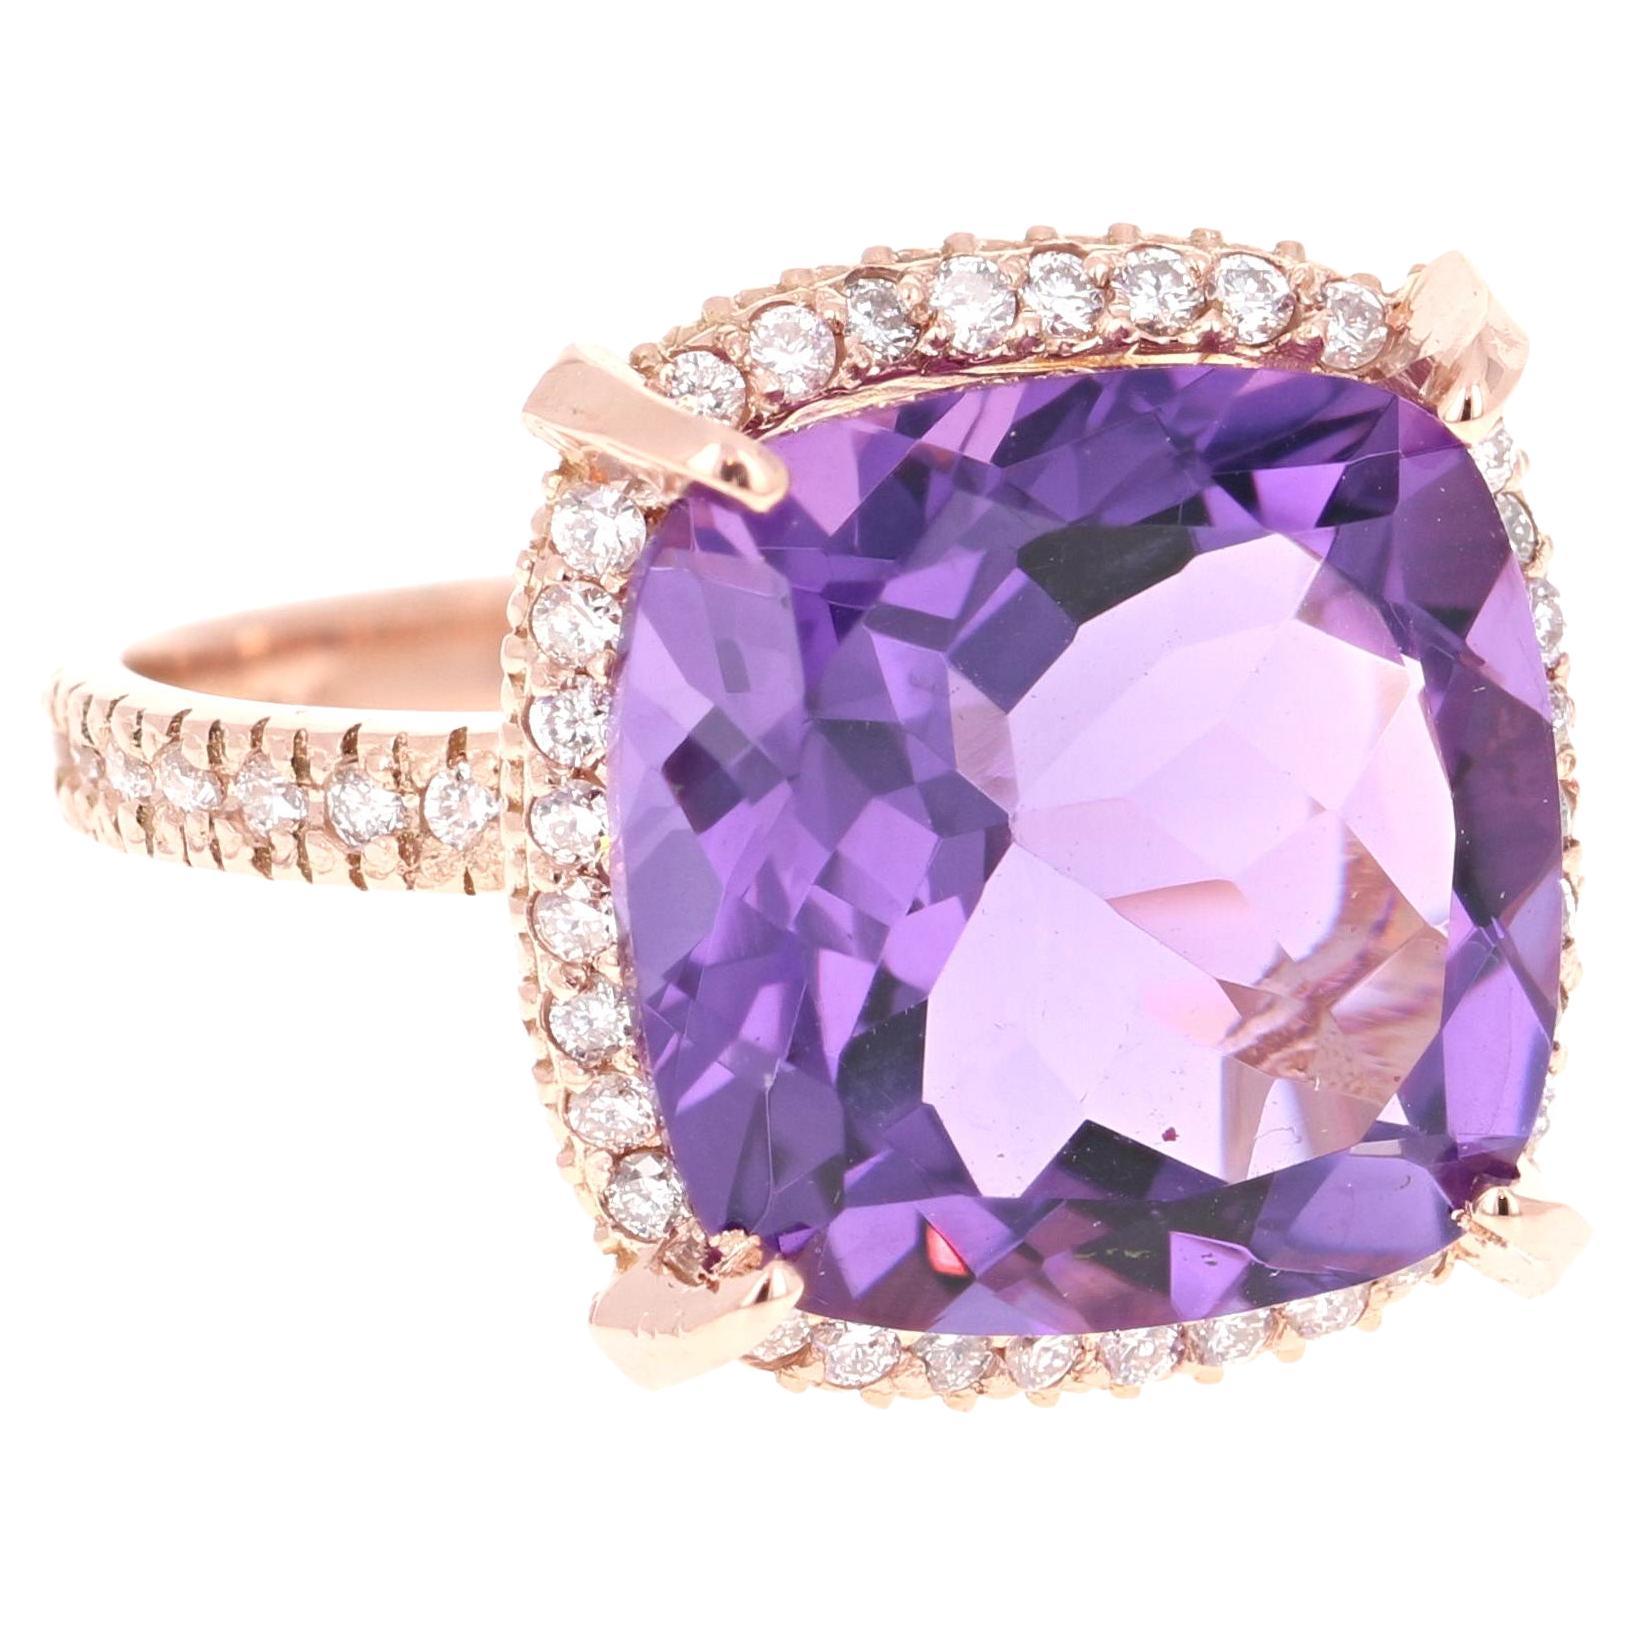 This beautiful ring has a 8.18 Carat Cushion Cut Amethyst and is surrounded by 50 Round Cut Diamonds that weigh 0.44 carats (Clarity: SI, Color: F). The total weight of the ring is 8.62 carats. 

The ring is designed in 14K Rose Gold and weighs